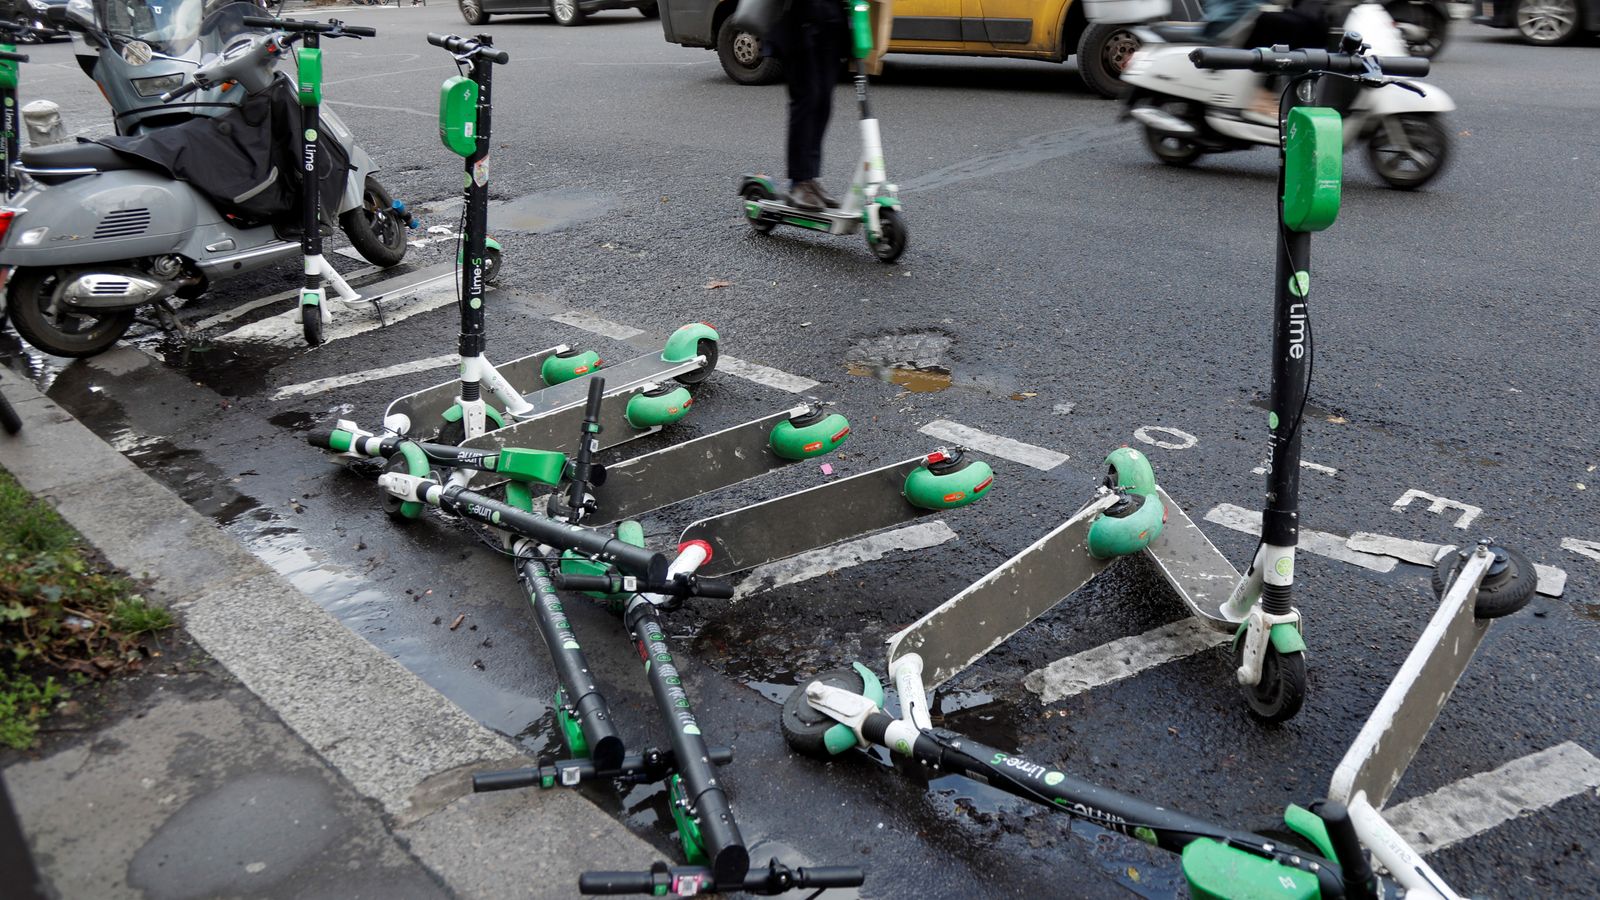 Paris votes on whether to ban rental e-scooters